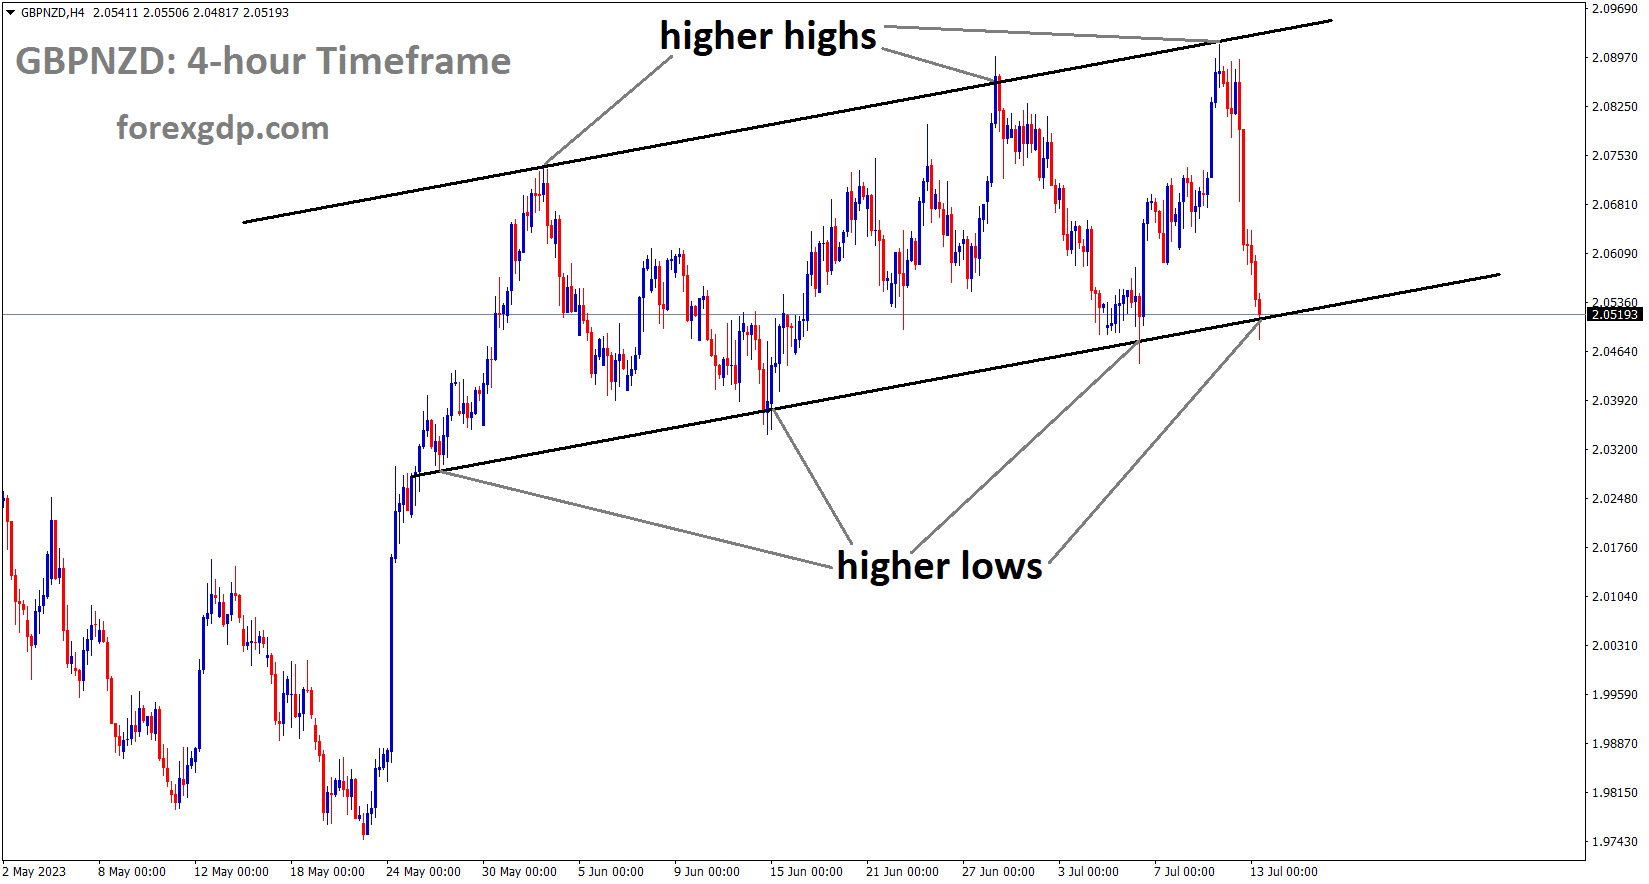 GBPNZD is moving in an Ascending channel and the market has reached the higher low area of the channel 1